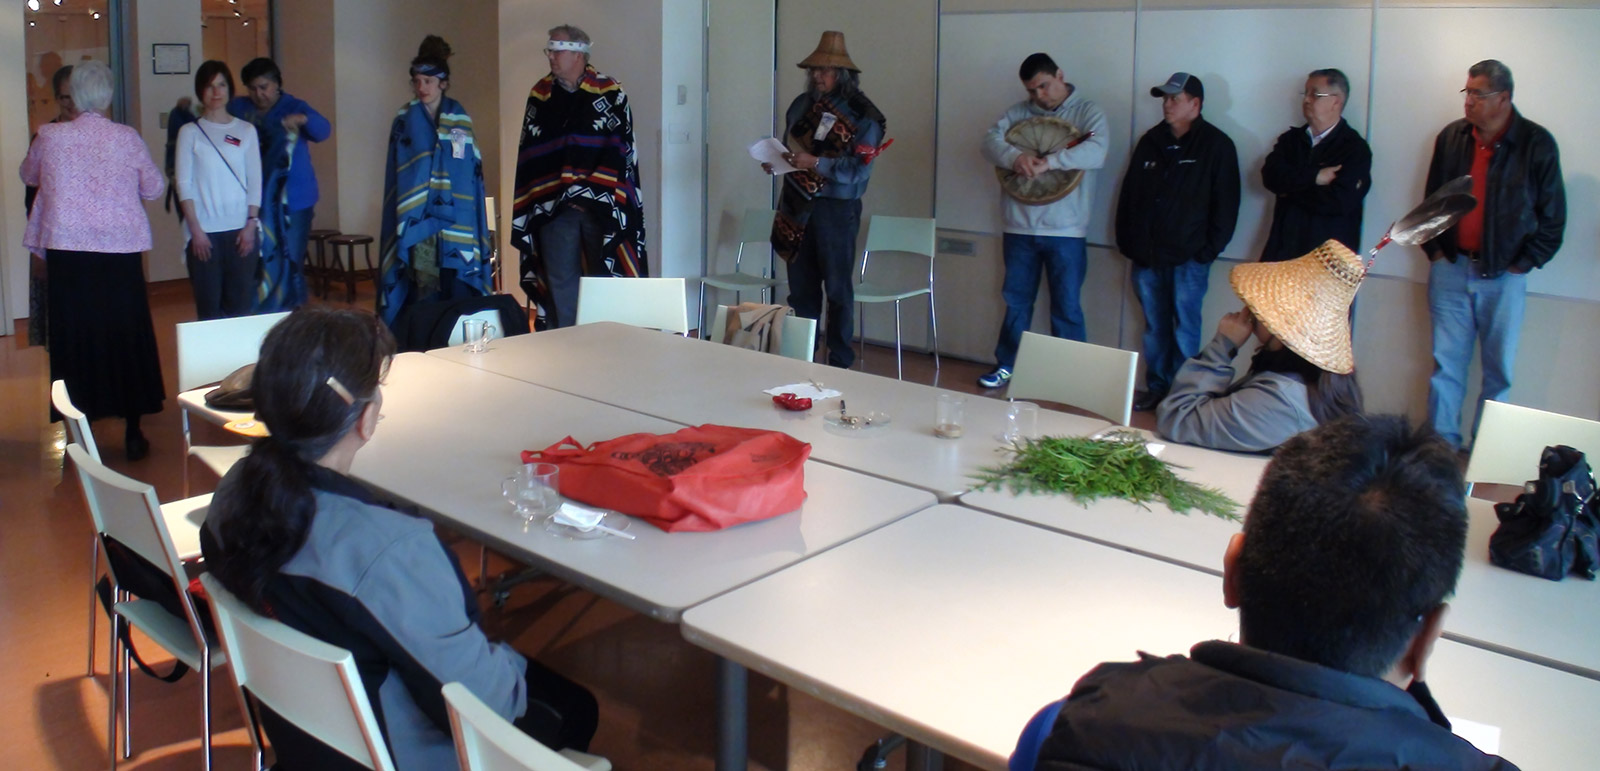 A red bag and some cedar boughs lie on a table. Three people sit at the table, while others stand alongside.